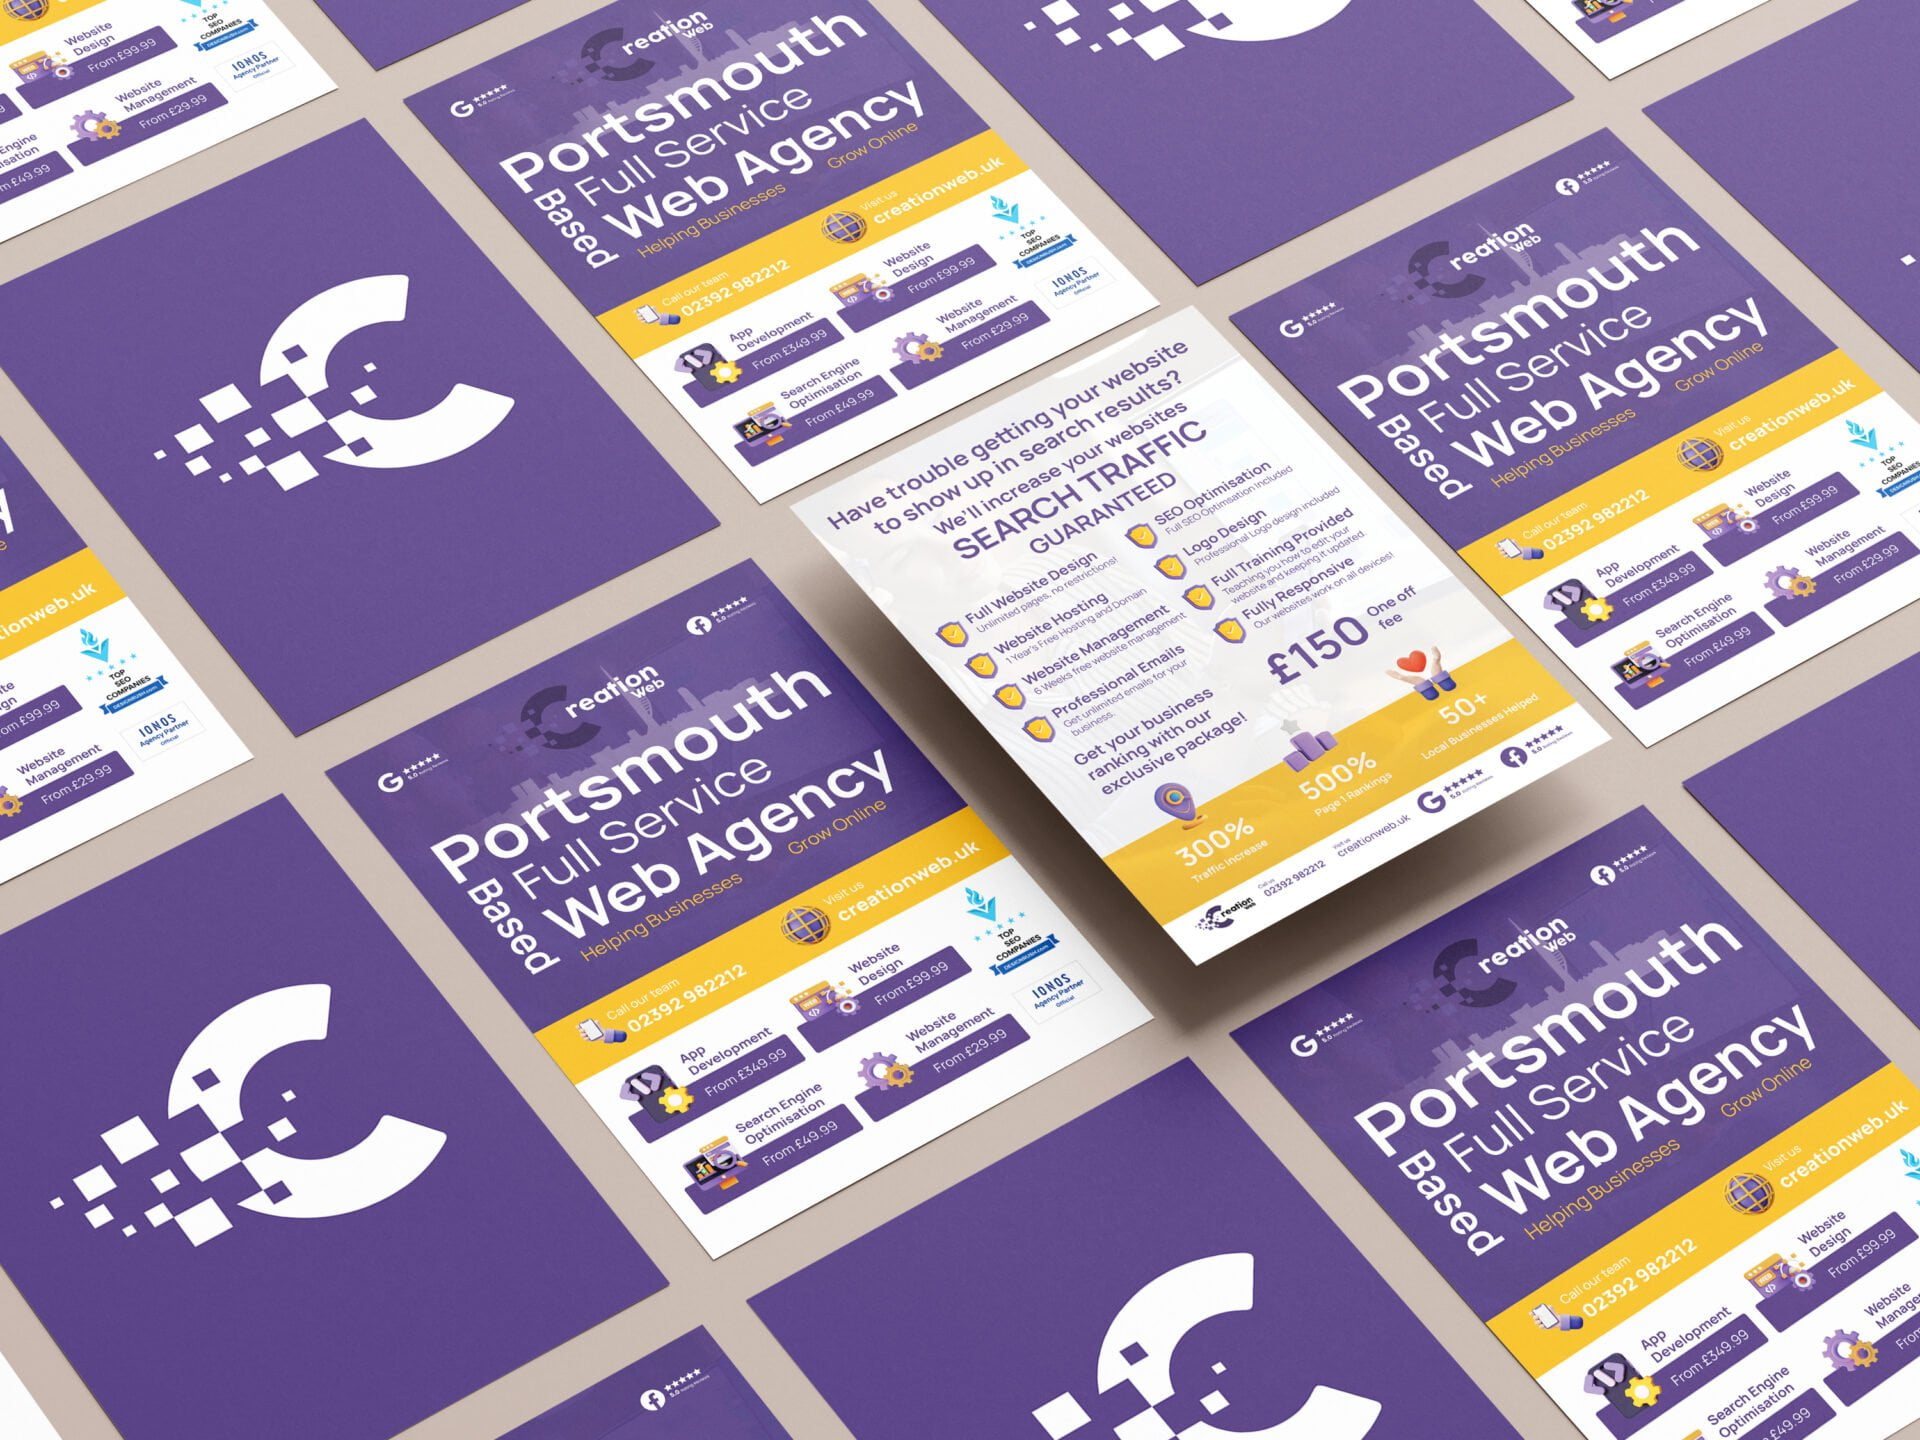 Free A4 Flyers Grid Mockup 3 Affordable App Development & SEO Agency in Portsmouth, Havant & Hampshire. We design and create websites From just £99